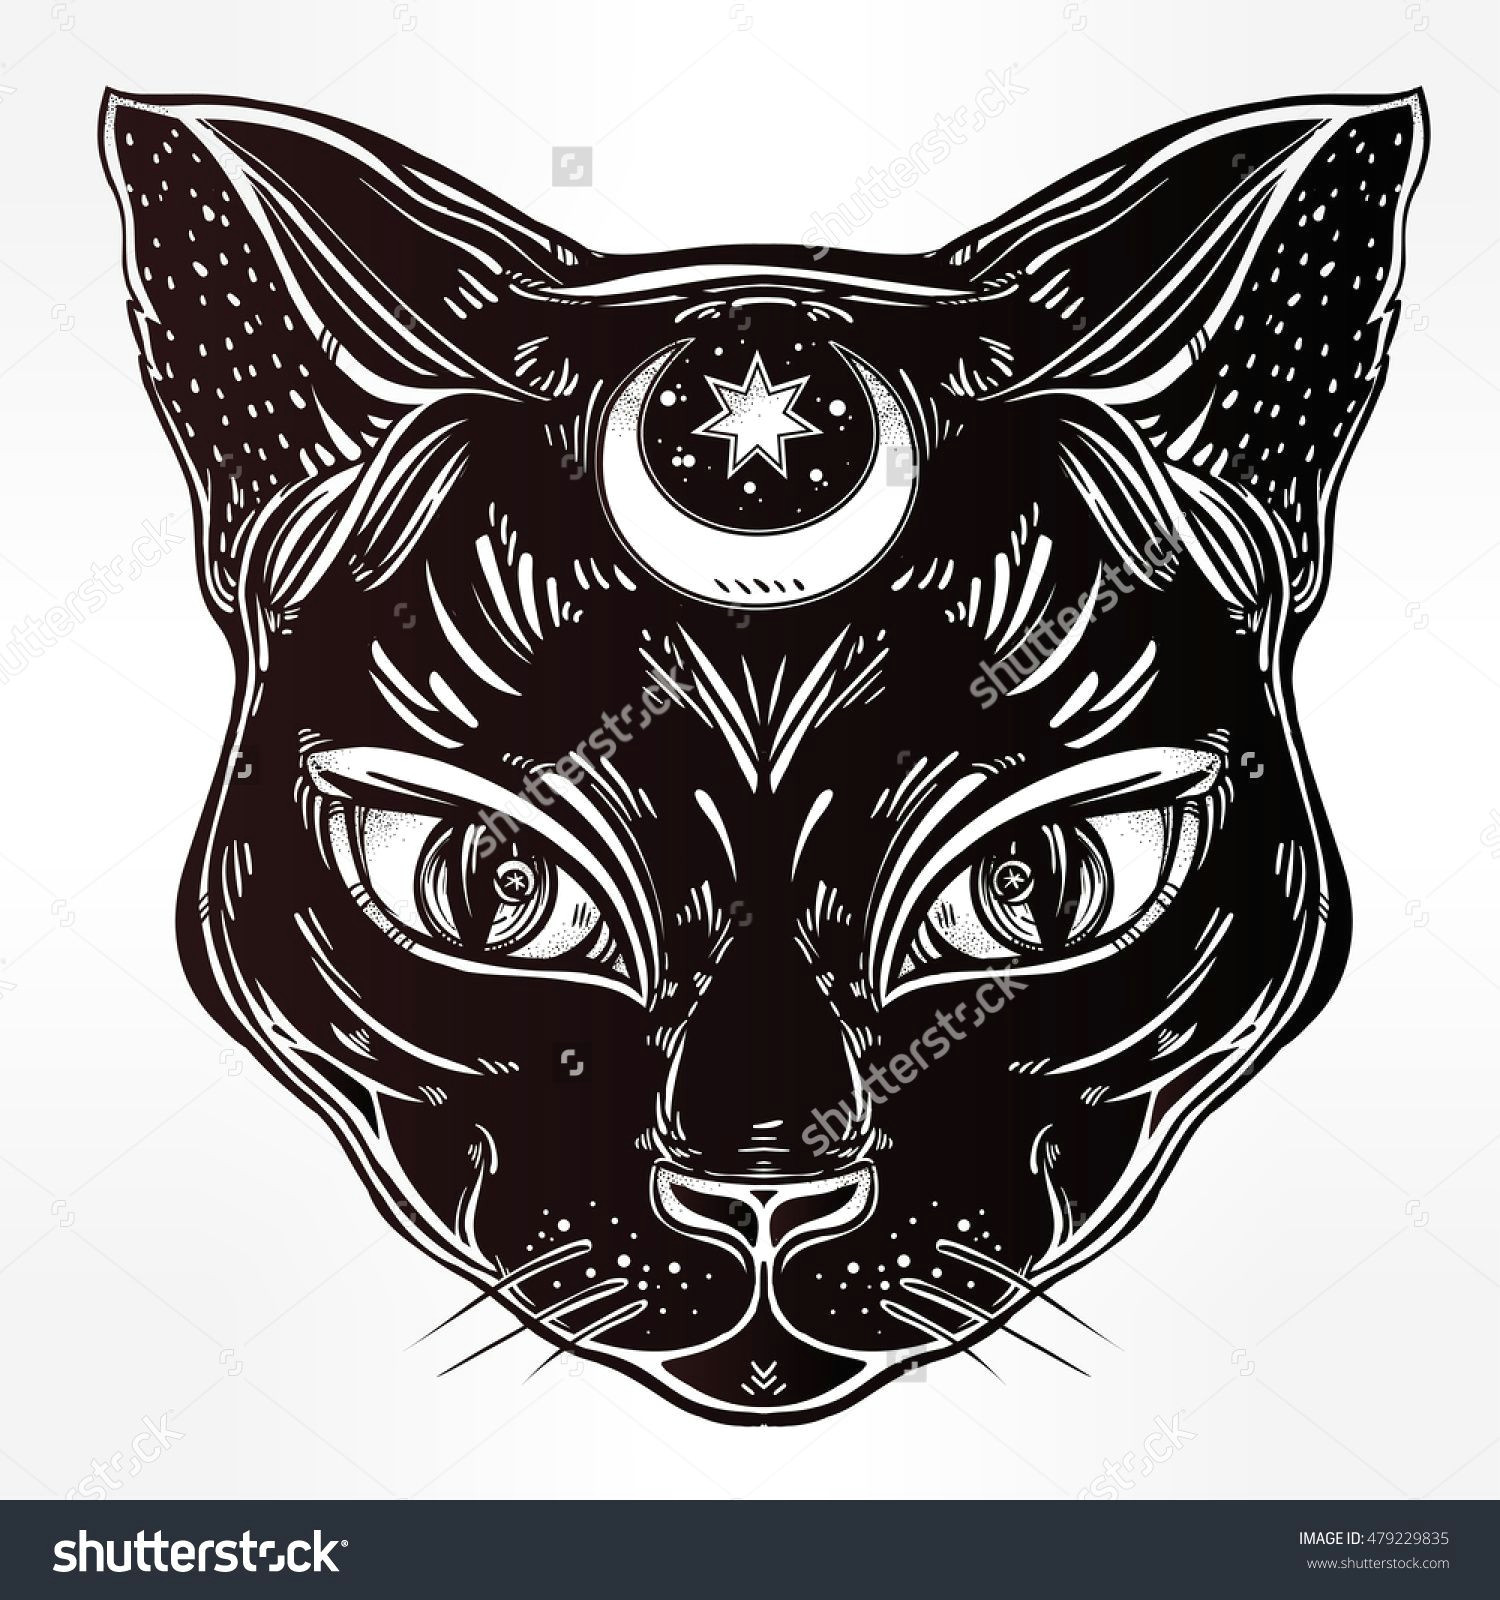 black cat head portrait with moon ideal halloween background tattoo art egyptian spirituality boho design perfect for print posters t shirts and